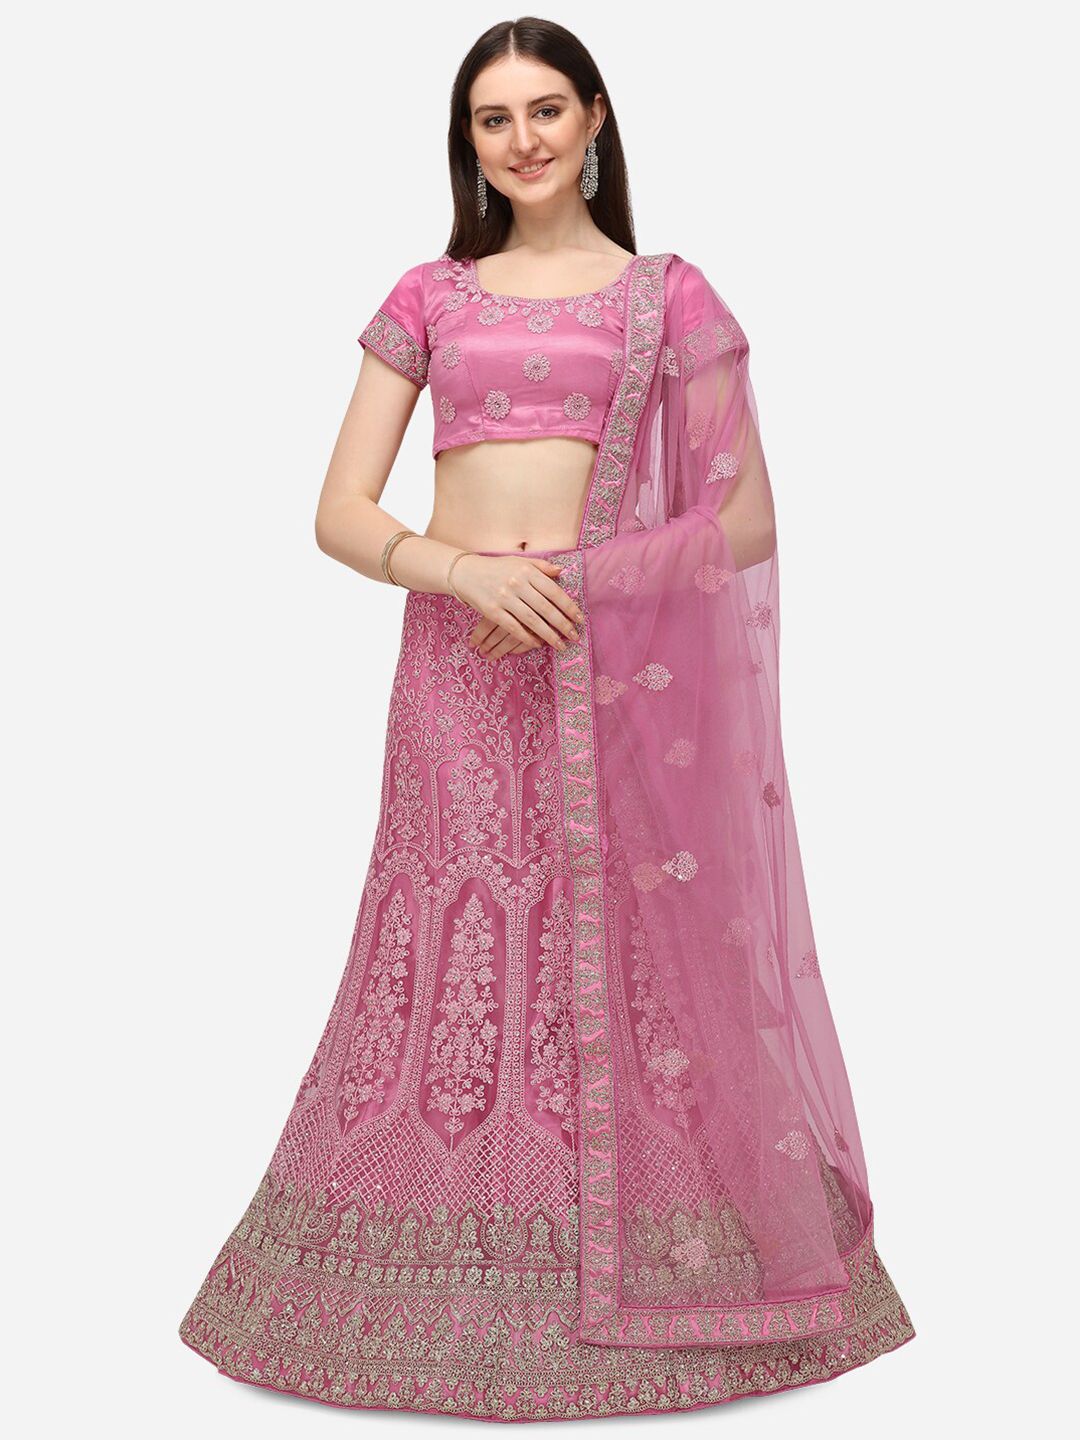 V SALES Pink & Silver-Toned Embroidered Thread Work Semi-Stitched Lehenga & Unstitched Blouse With Dupatta Price in India